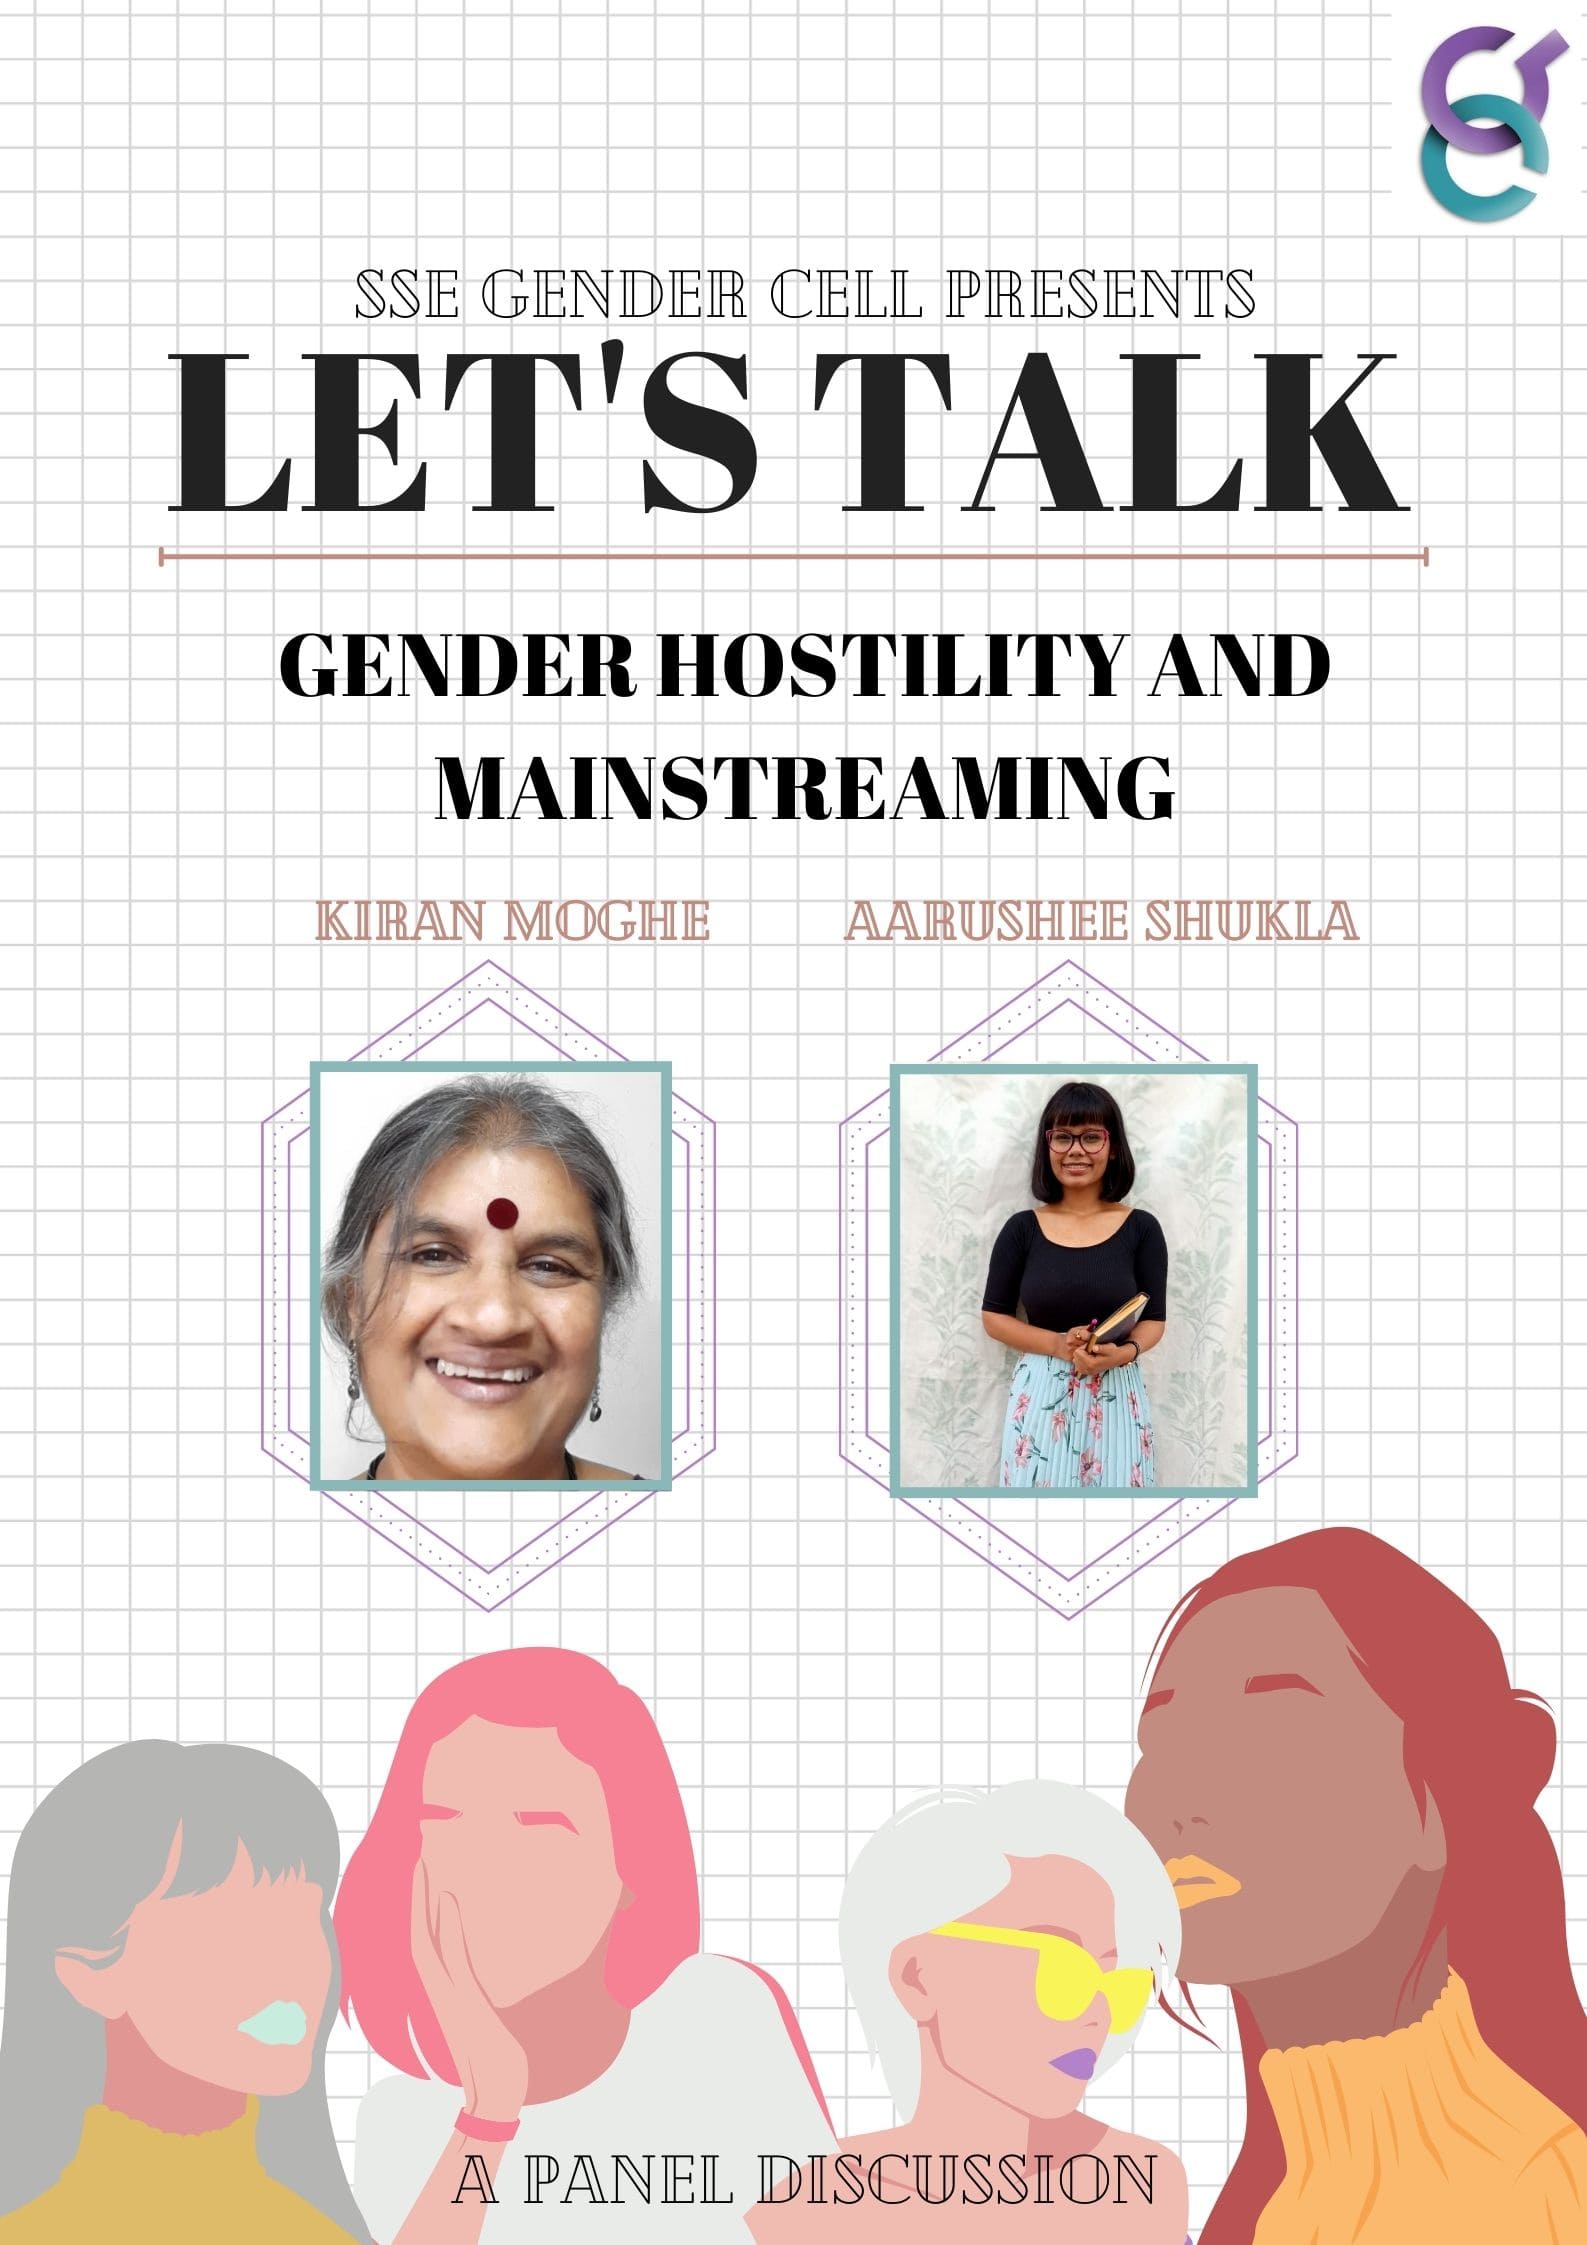 Gender Hospitality and Mainstreaming  at gender cell 